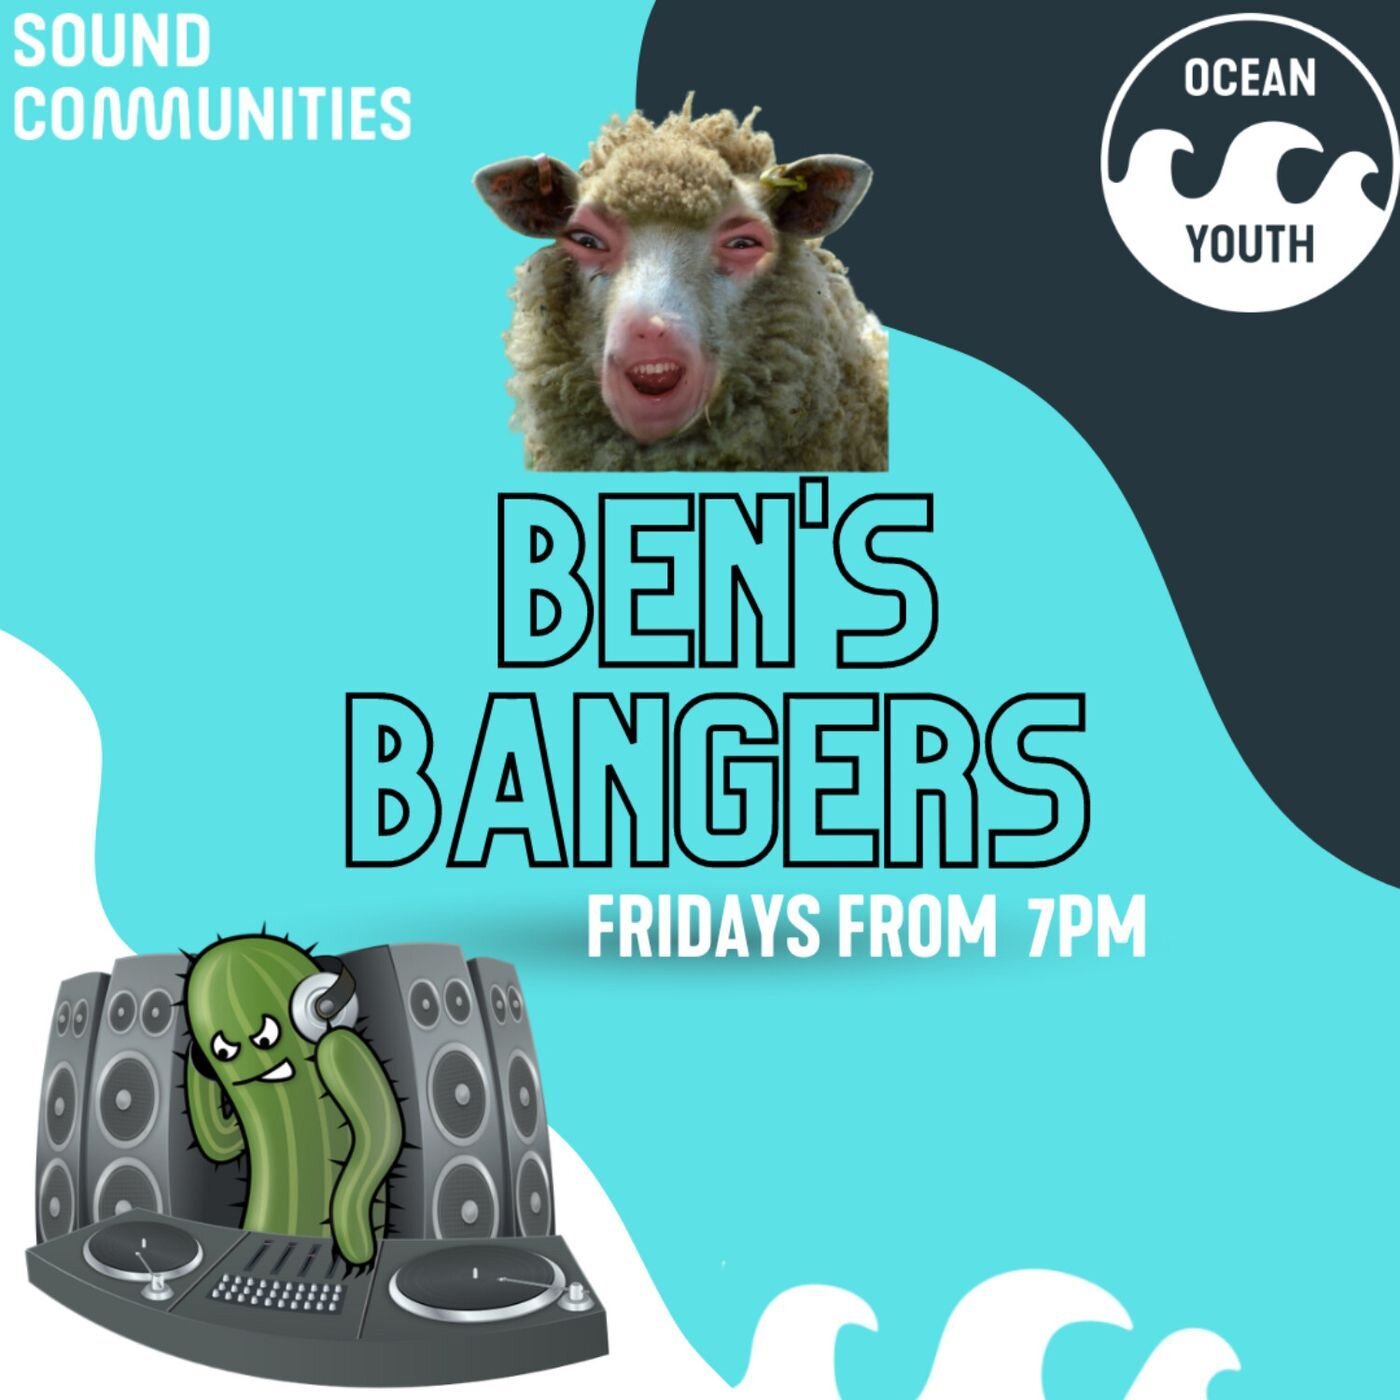 Ben's Bangers Live tonight from 7pm! 🎉 

Start your weekend with the biggest dance tunes 🕺 📻